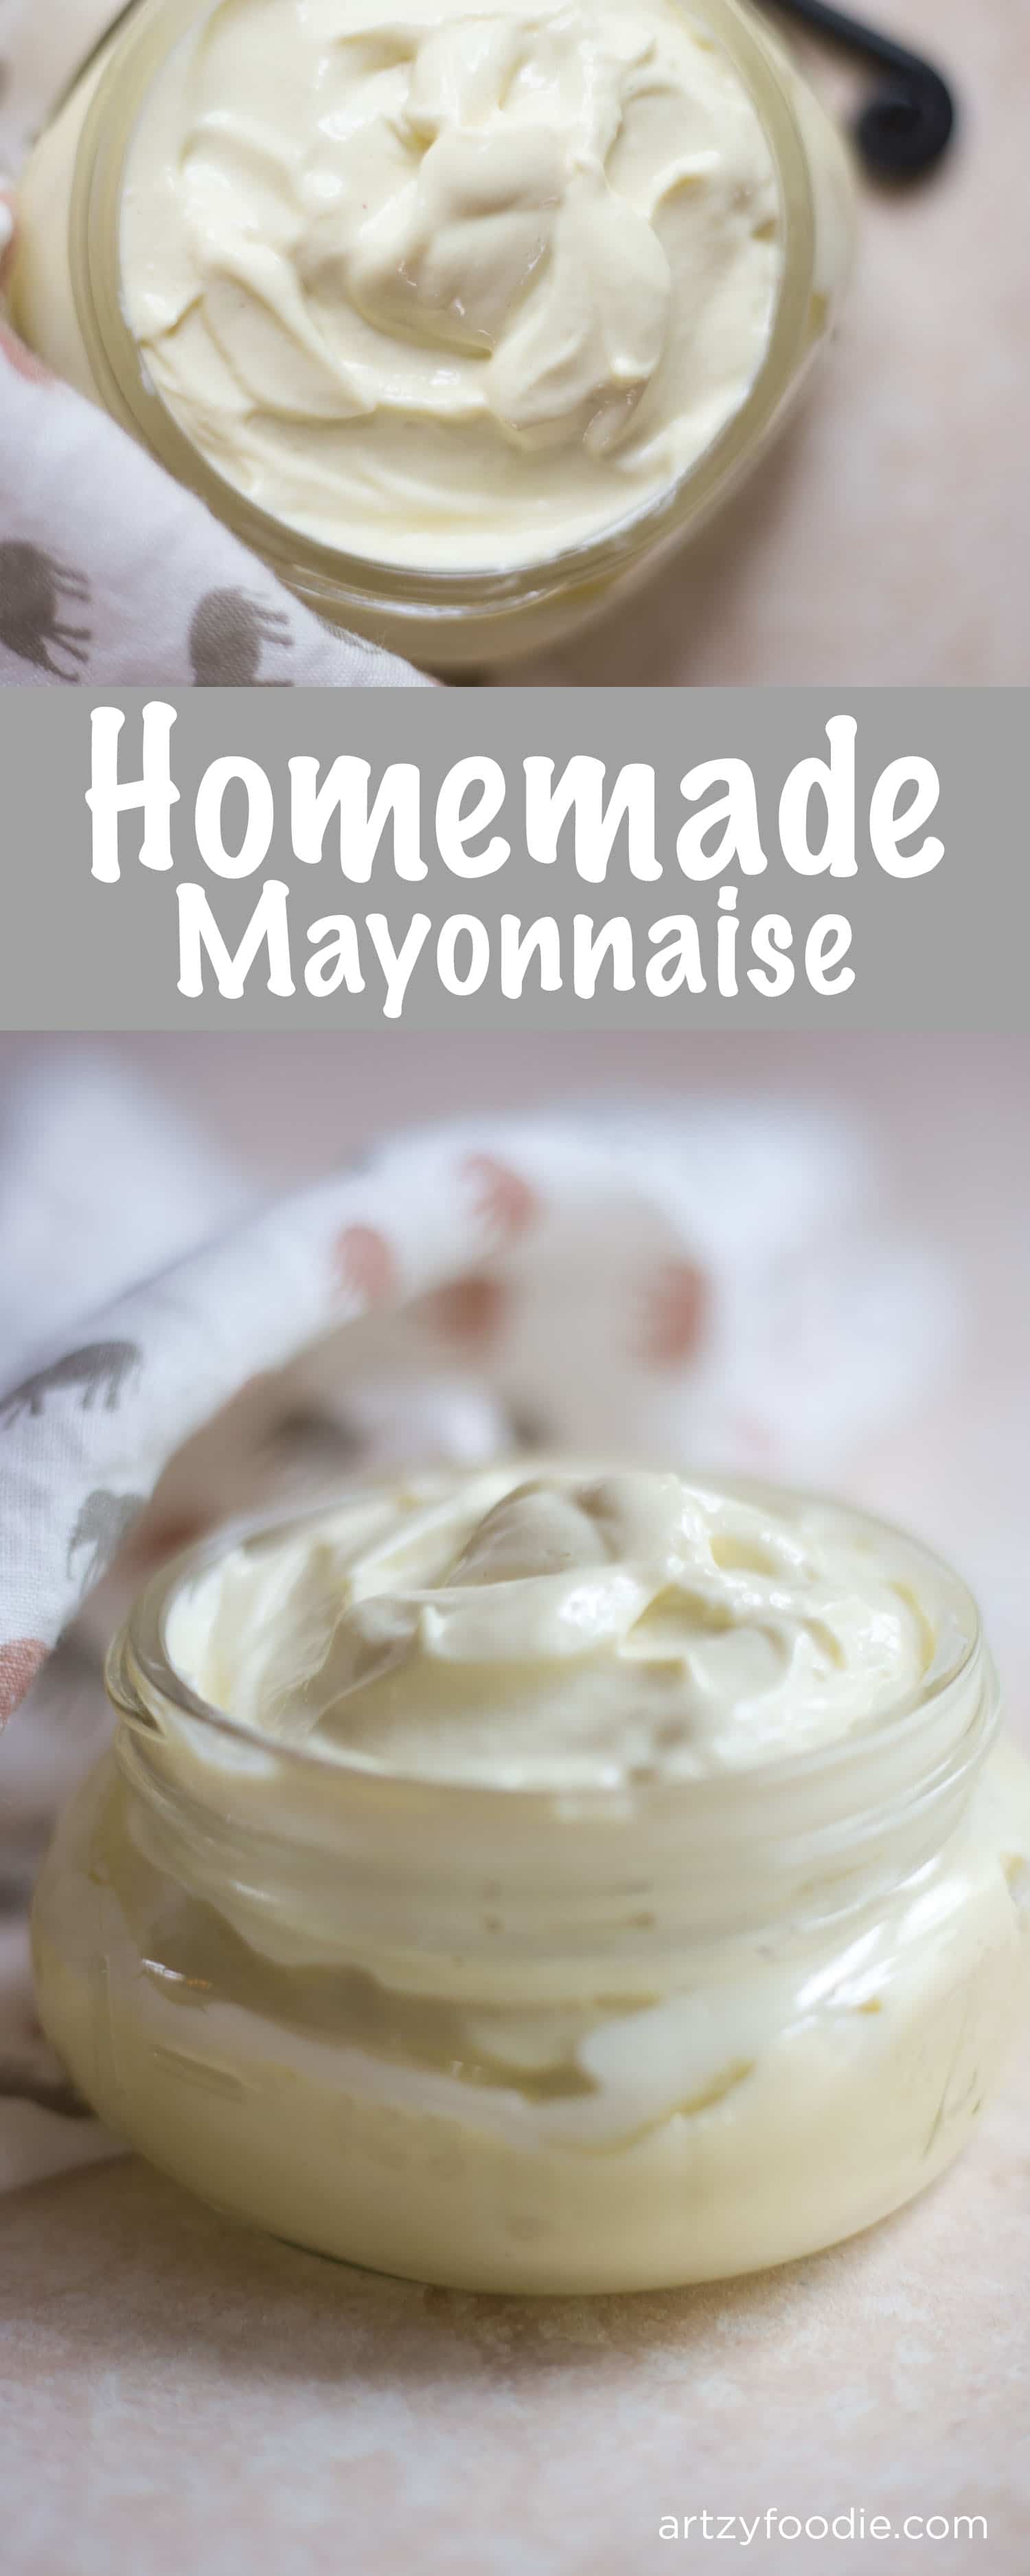 Homemade mayonnaise is surprisingly simple and oh so tasty! |artzyfoodie.com|